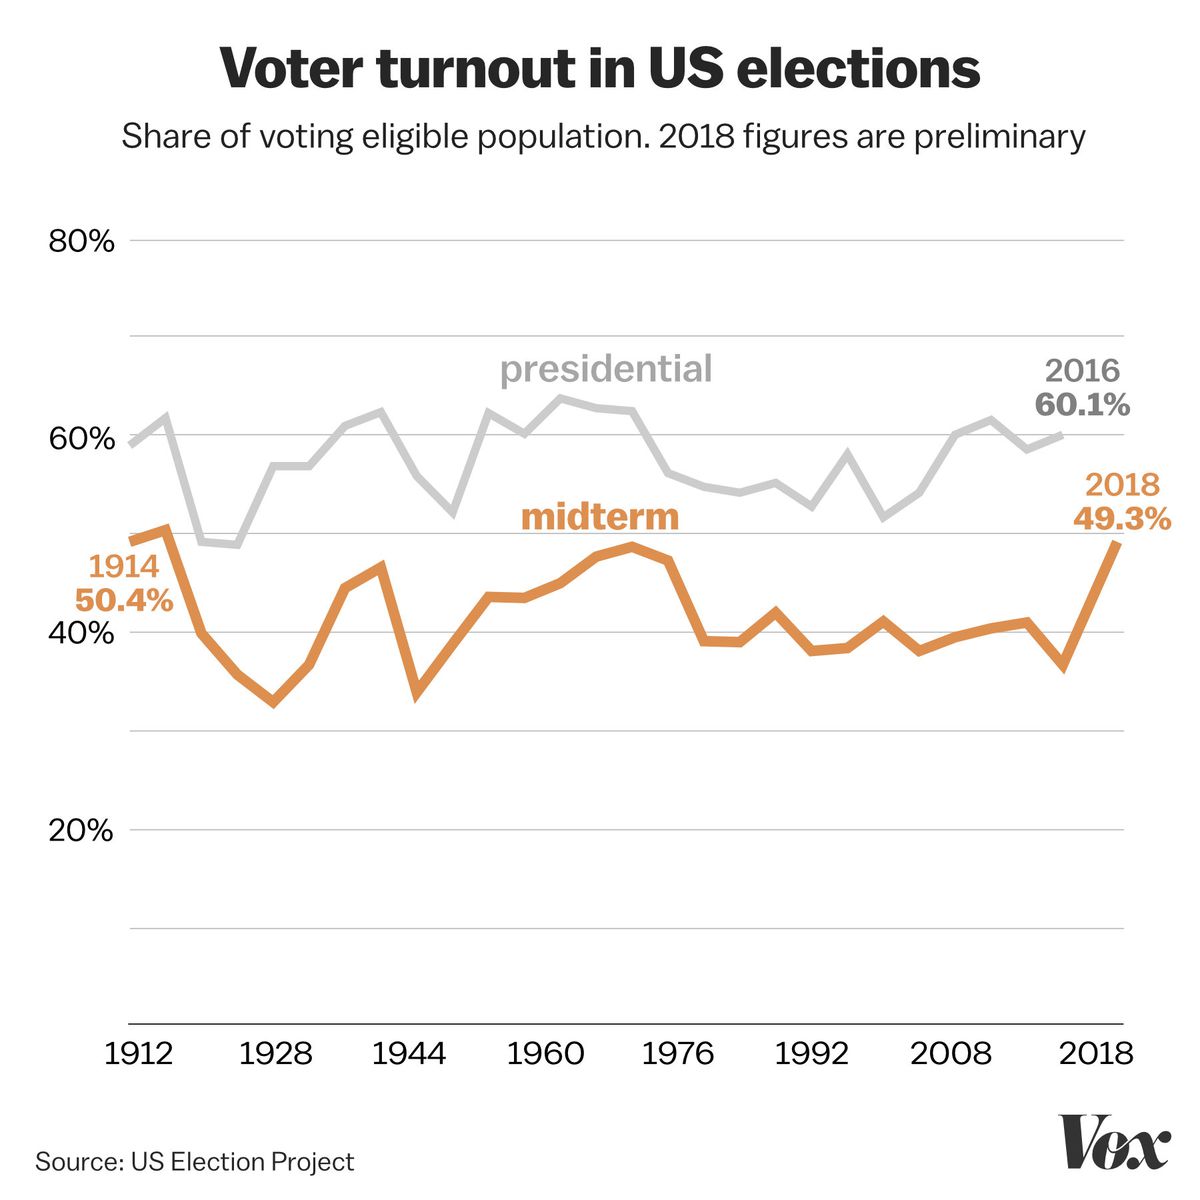 Chart showing voter turnout from 1912-2018.